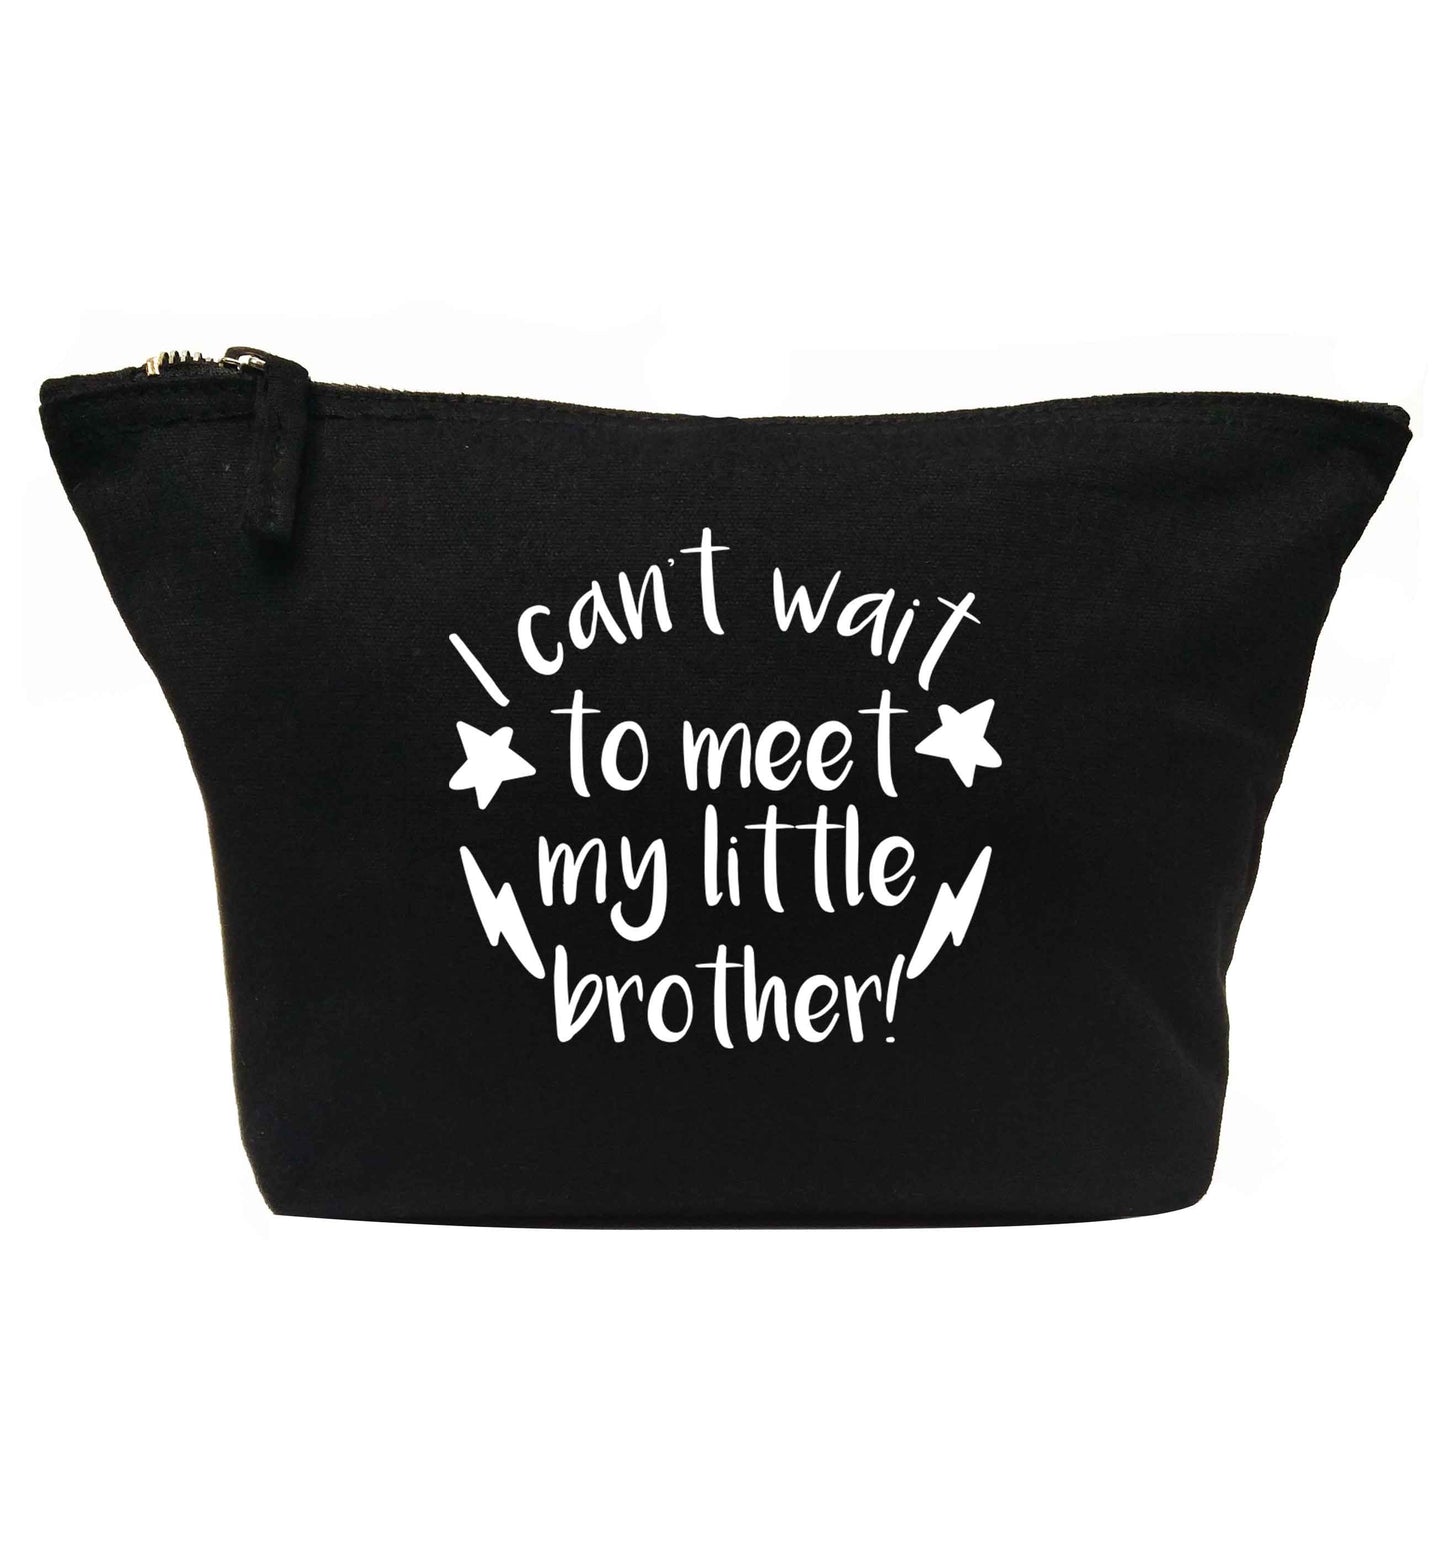 I can't wait to meet my sister! | makeup / wash bag